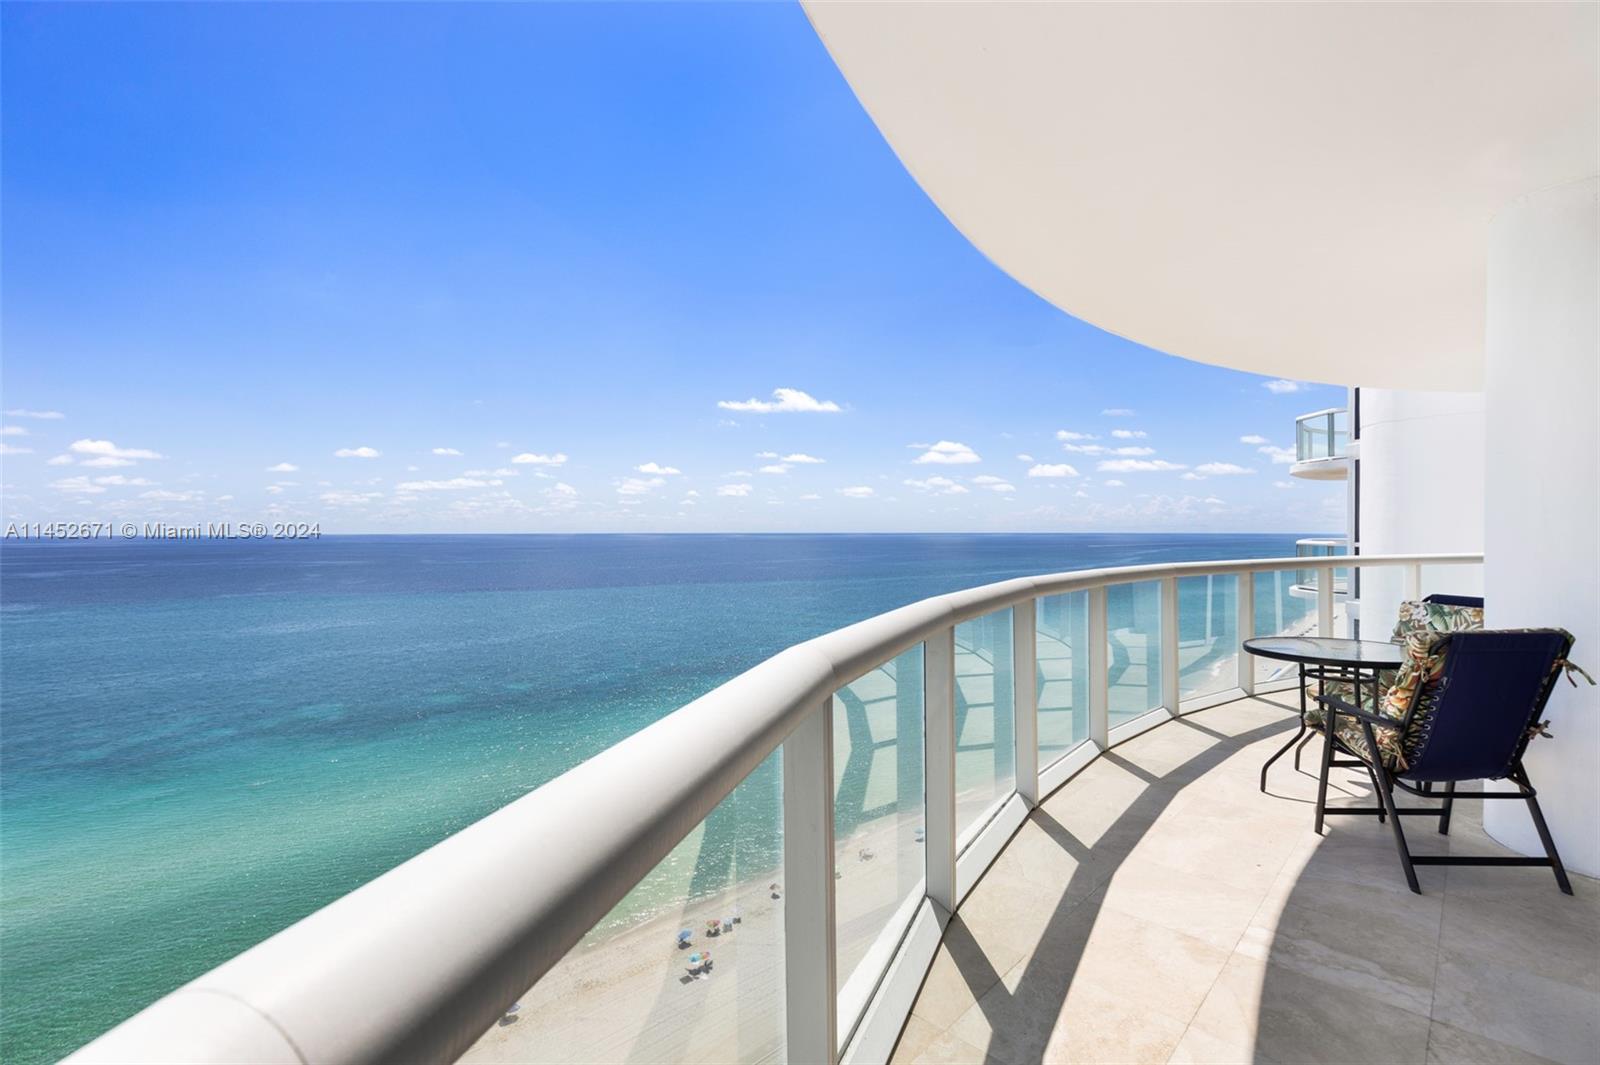 6365 Collins Ave 2102, Miami Beach, Florida 33141, 2 Bedrooms Bedrooms, ,2 BathroomsBathrooms,Residential,For Sale,6365 Collins Ave 2102,A11452671